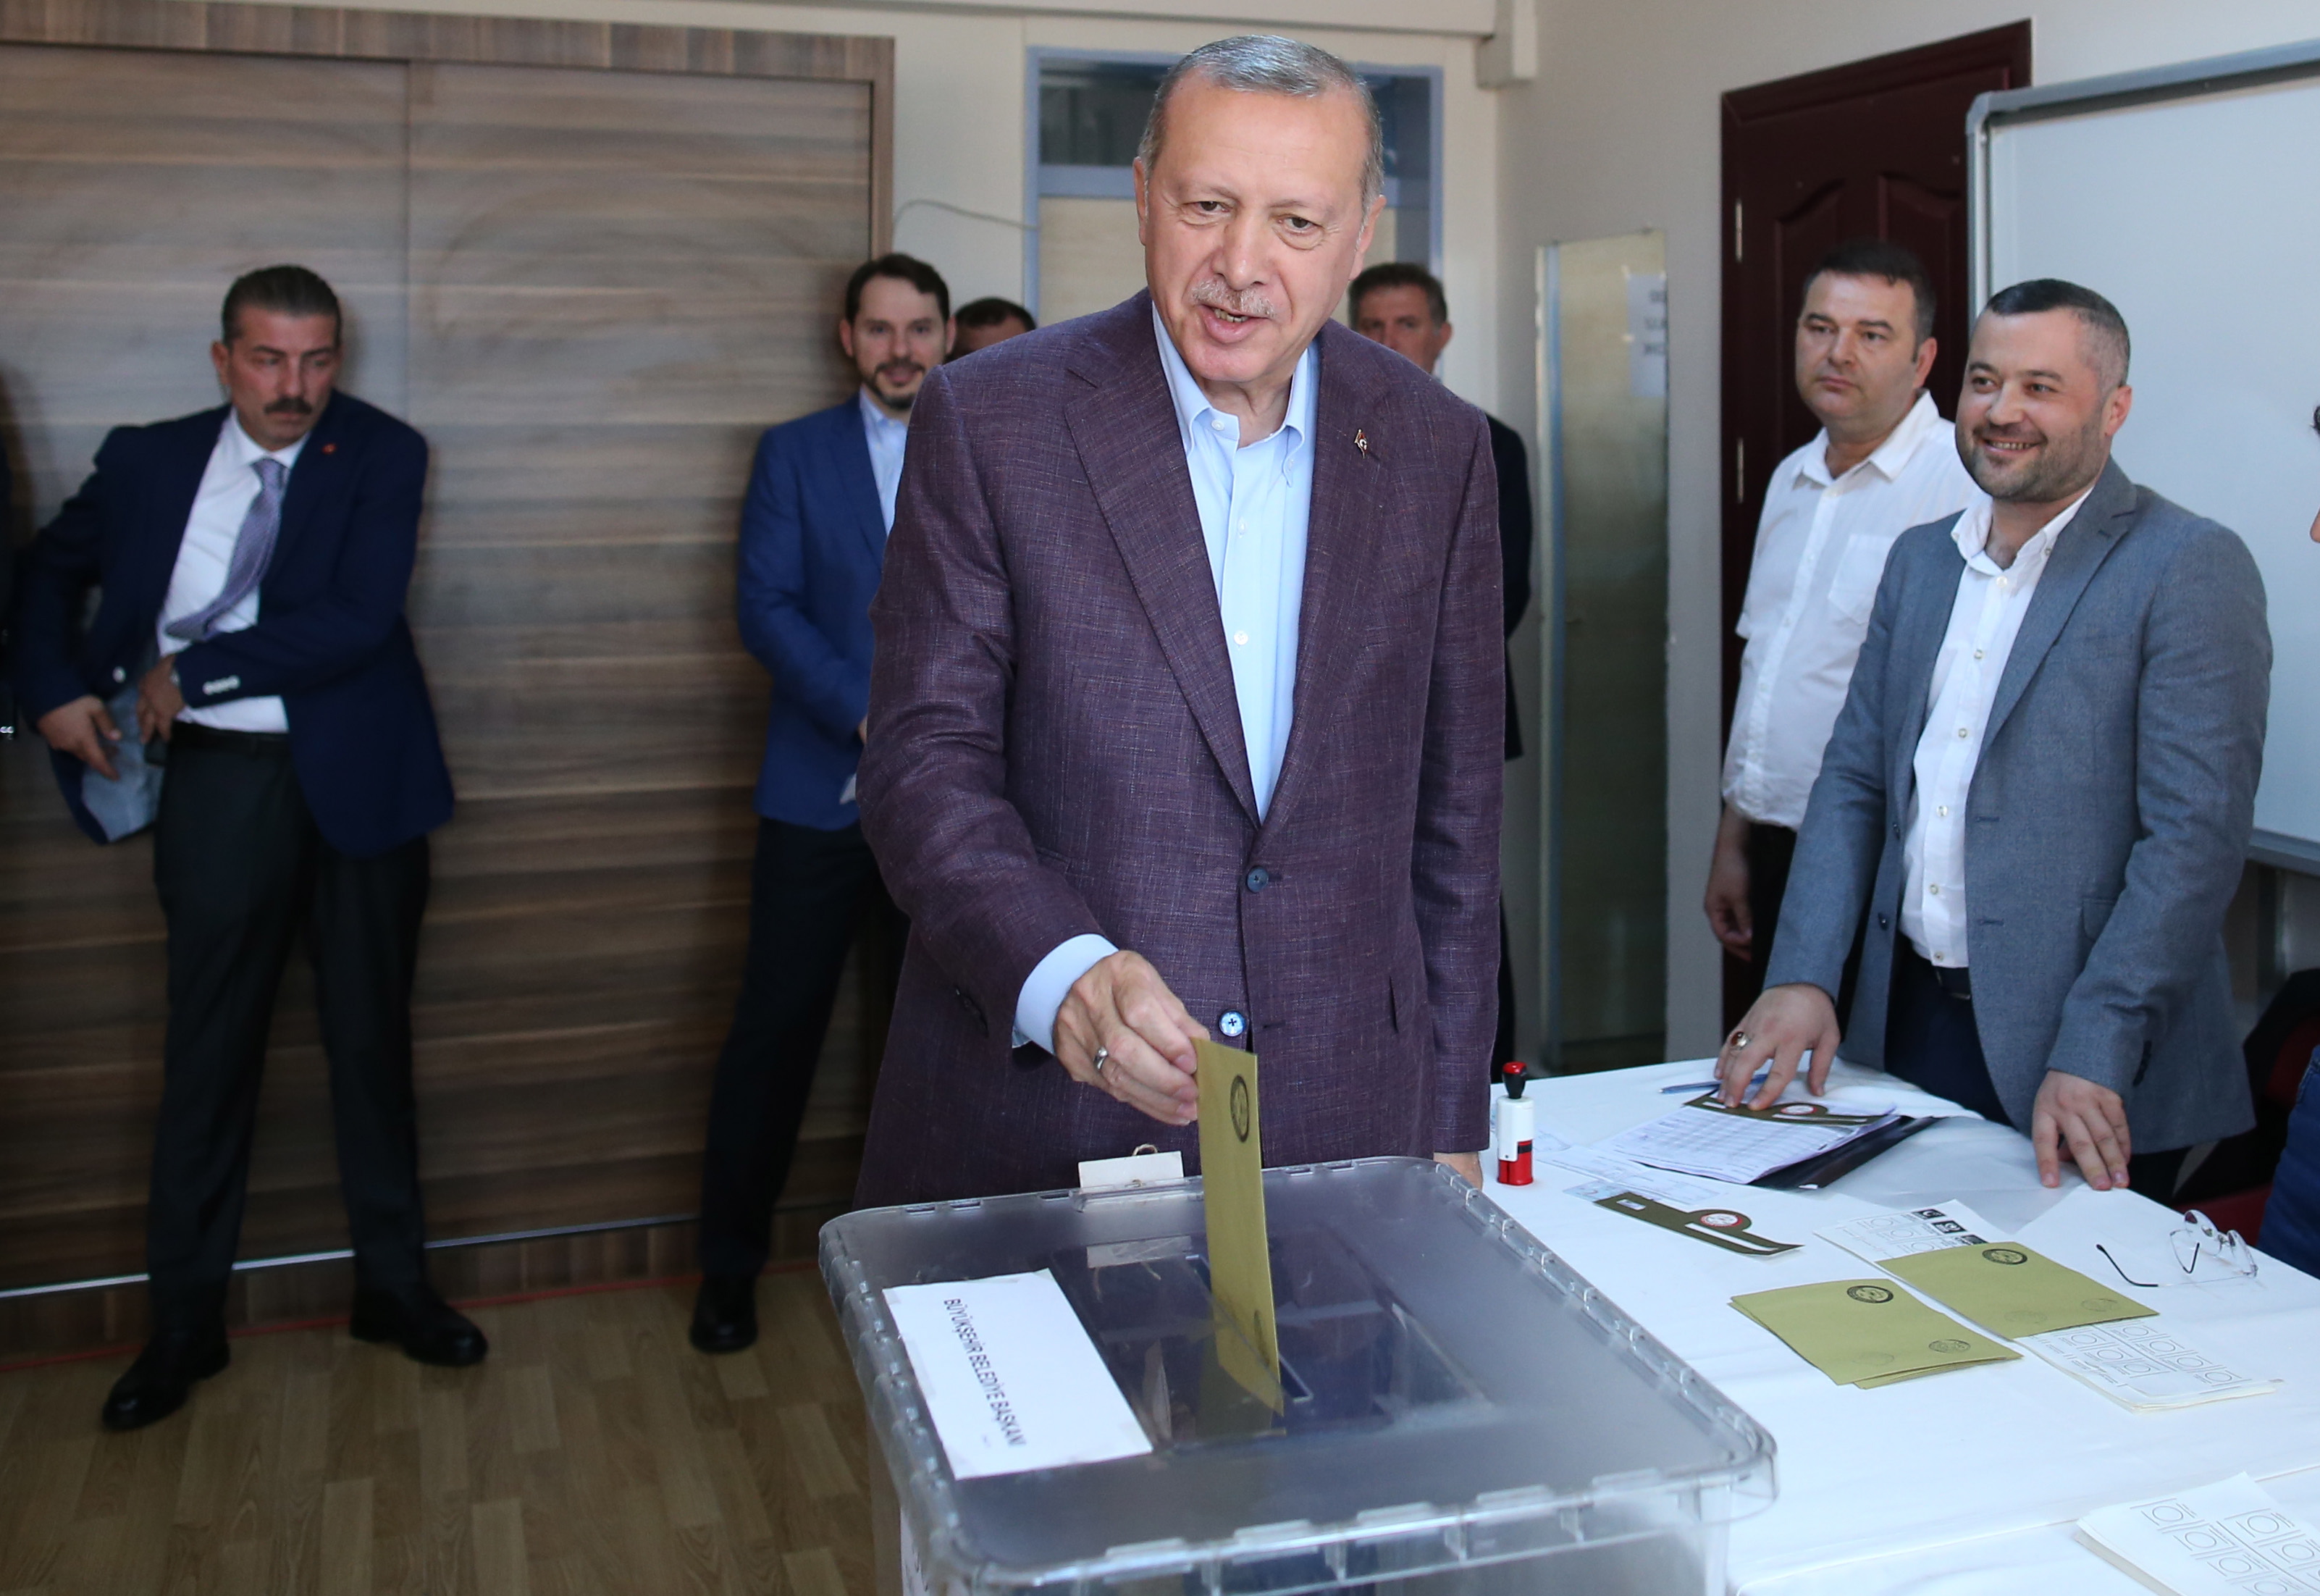 epa07667695 Turkish President Recep Tayyip Erdogan casts his vote in the Istanbul mayor election re-run, in Istanbul, Turkey, 23 June 2019. Some 10.5 million people will vote on the day in a re-run of the mayoral election. The Turkish Electoral Commission ordered a repeat of the mayoral election in Istanbul for 23 June 2019, after Turkish President Erdogan's AK Party had alleged there was 'corruption' behind his party losing in the 31 March 2019 polls.  EPA/ERDEM SAHIN